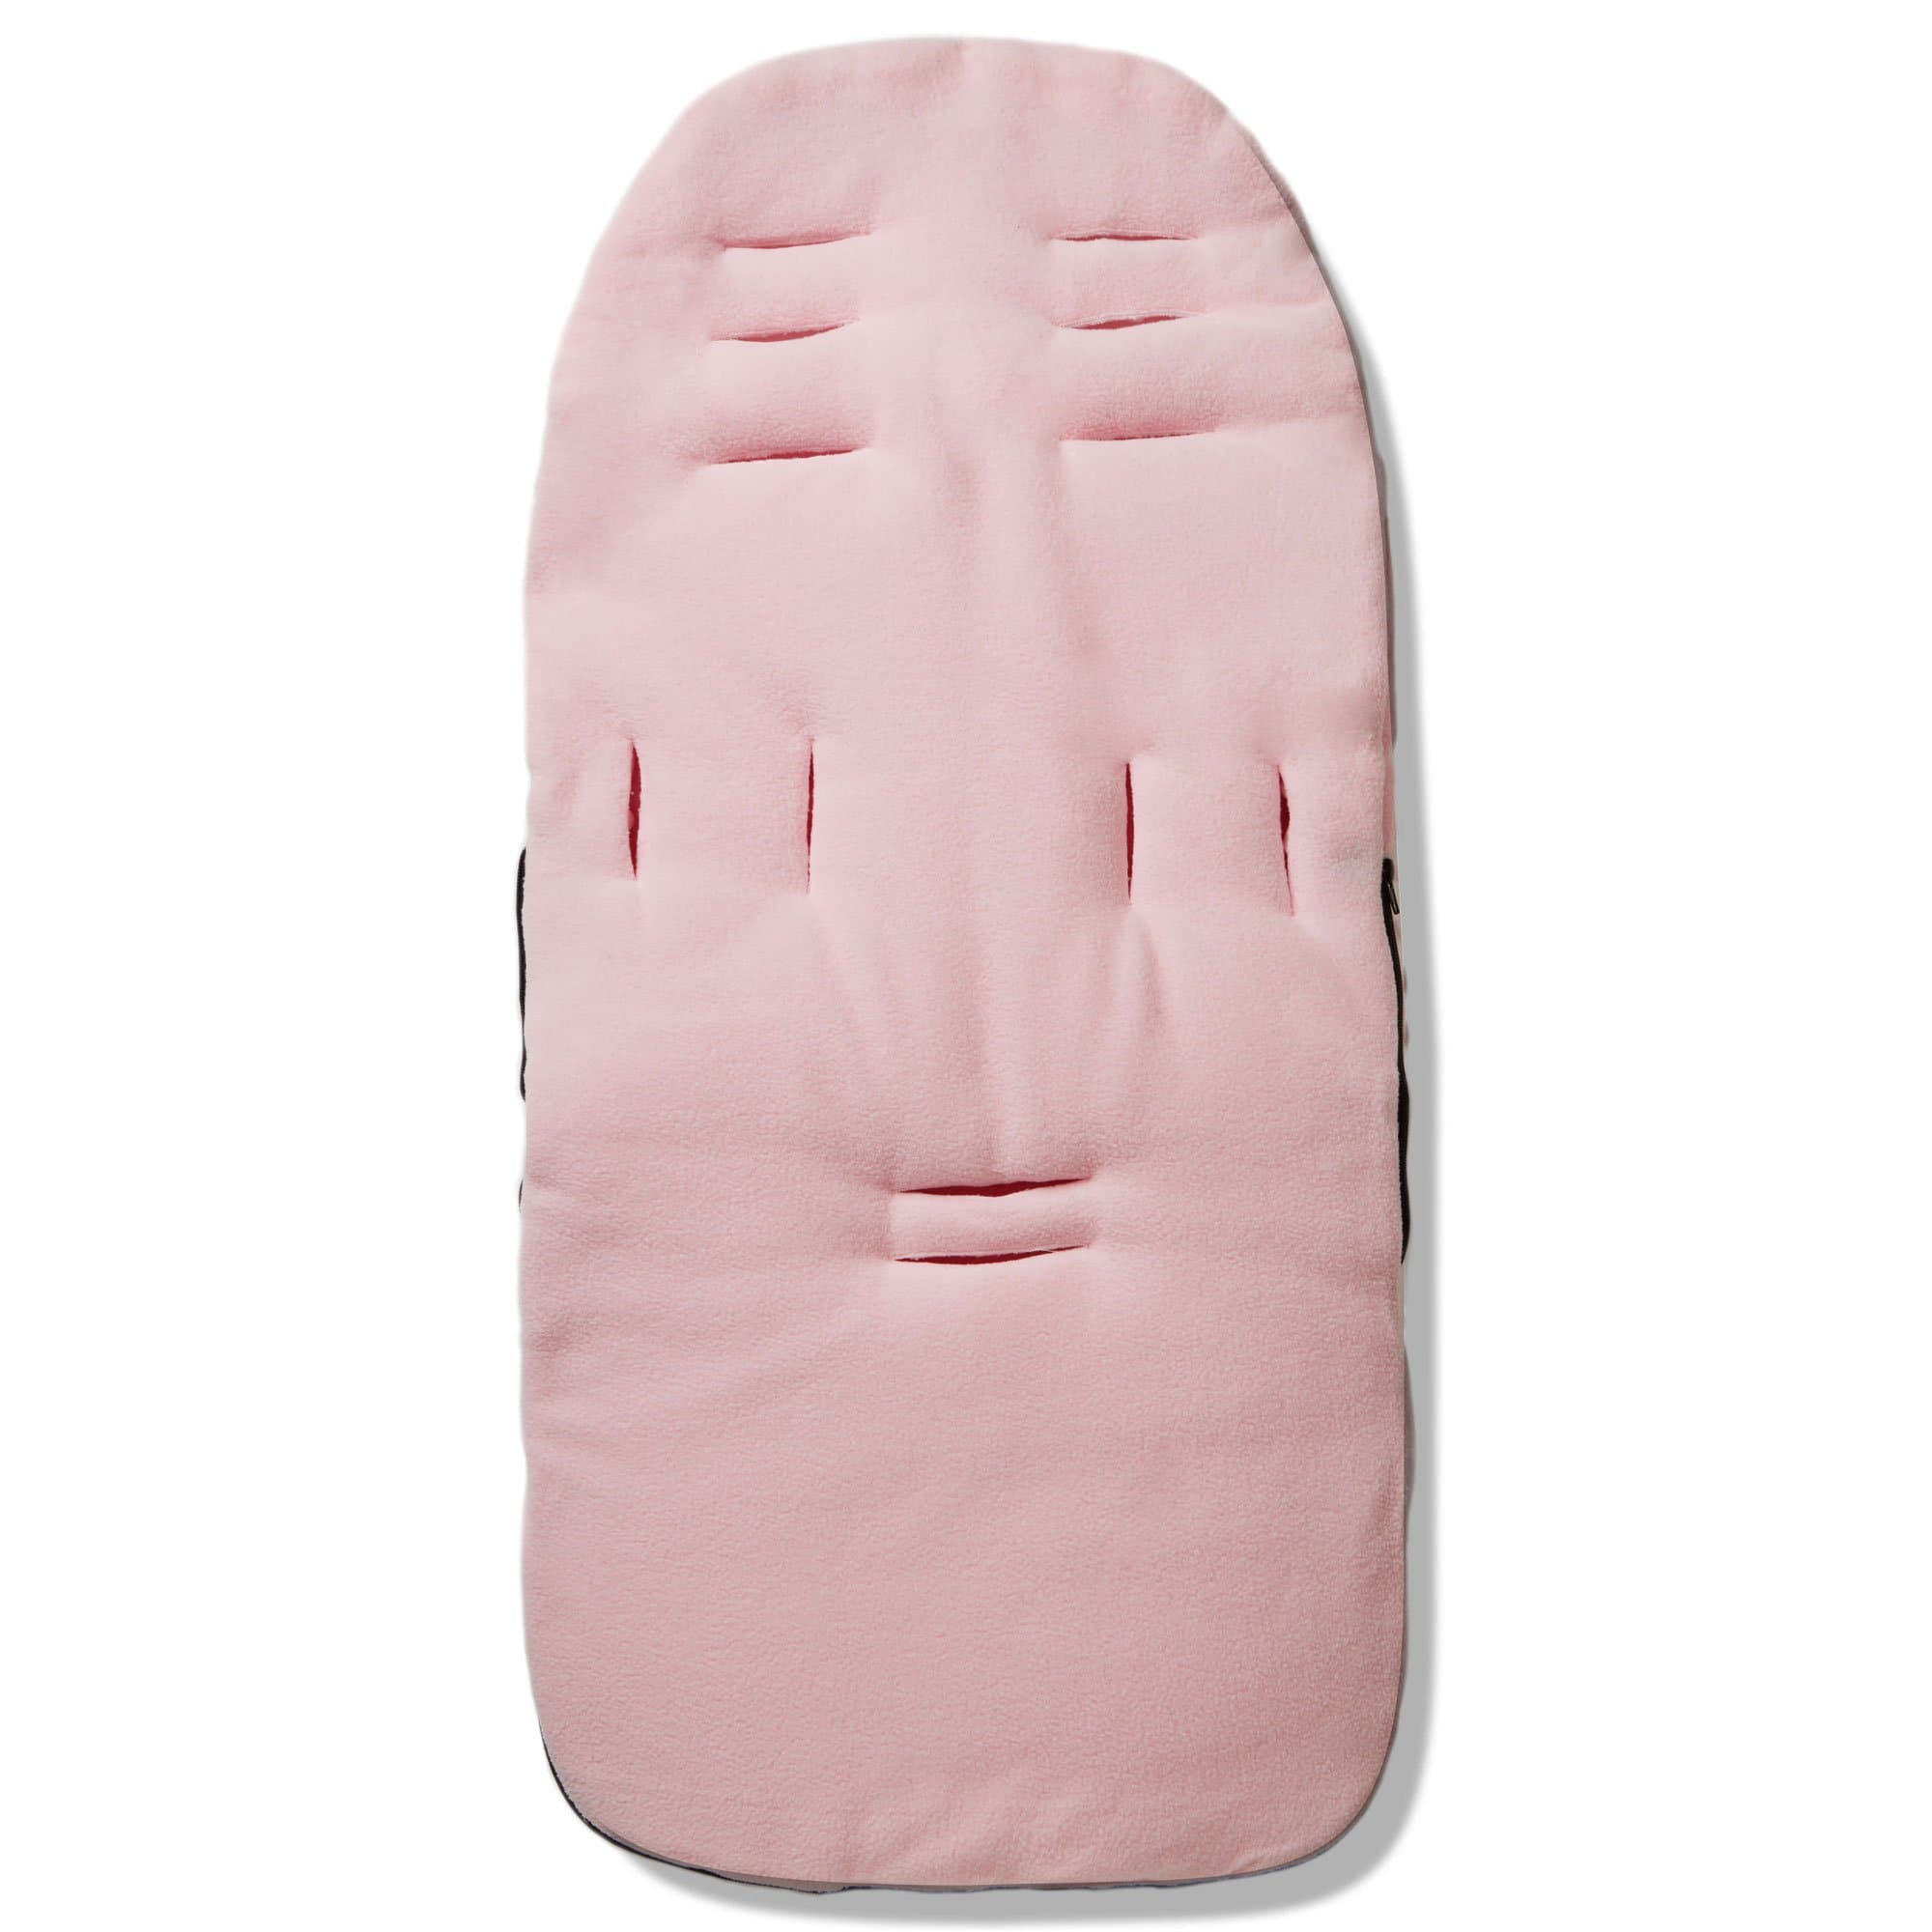 Dimple Footmuff / Cosy Toes Compatible with Esprit - For Your Little One